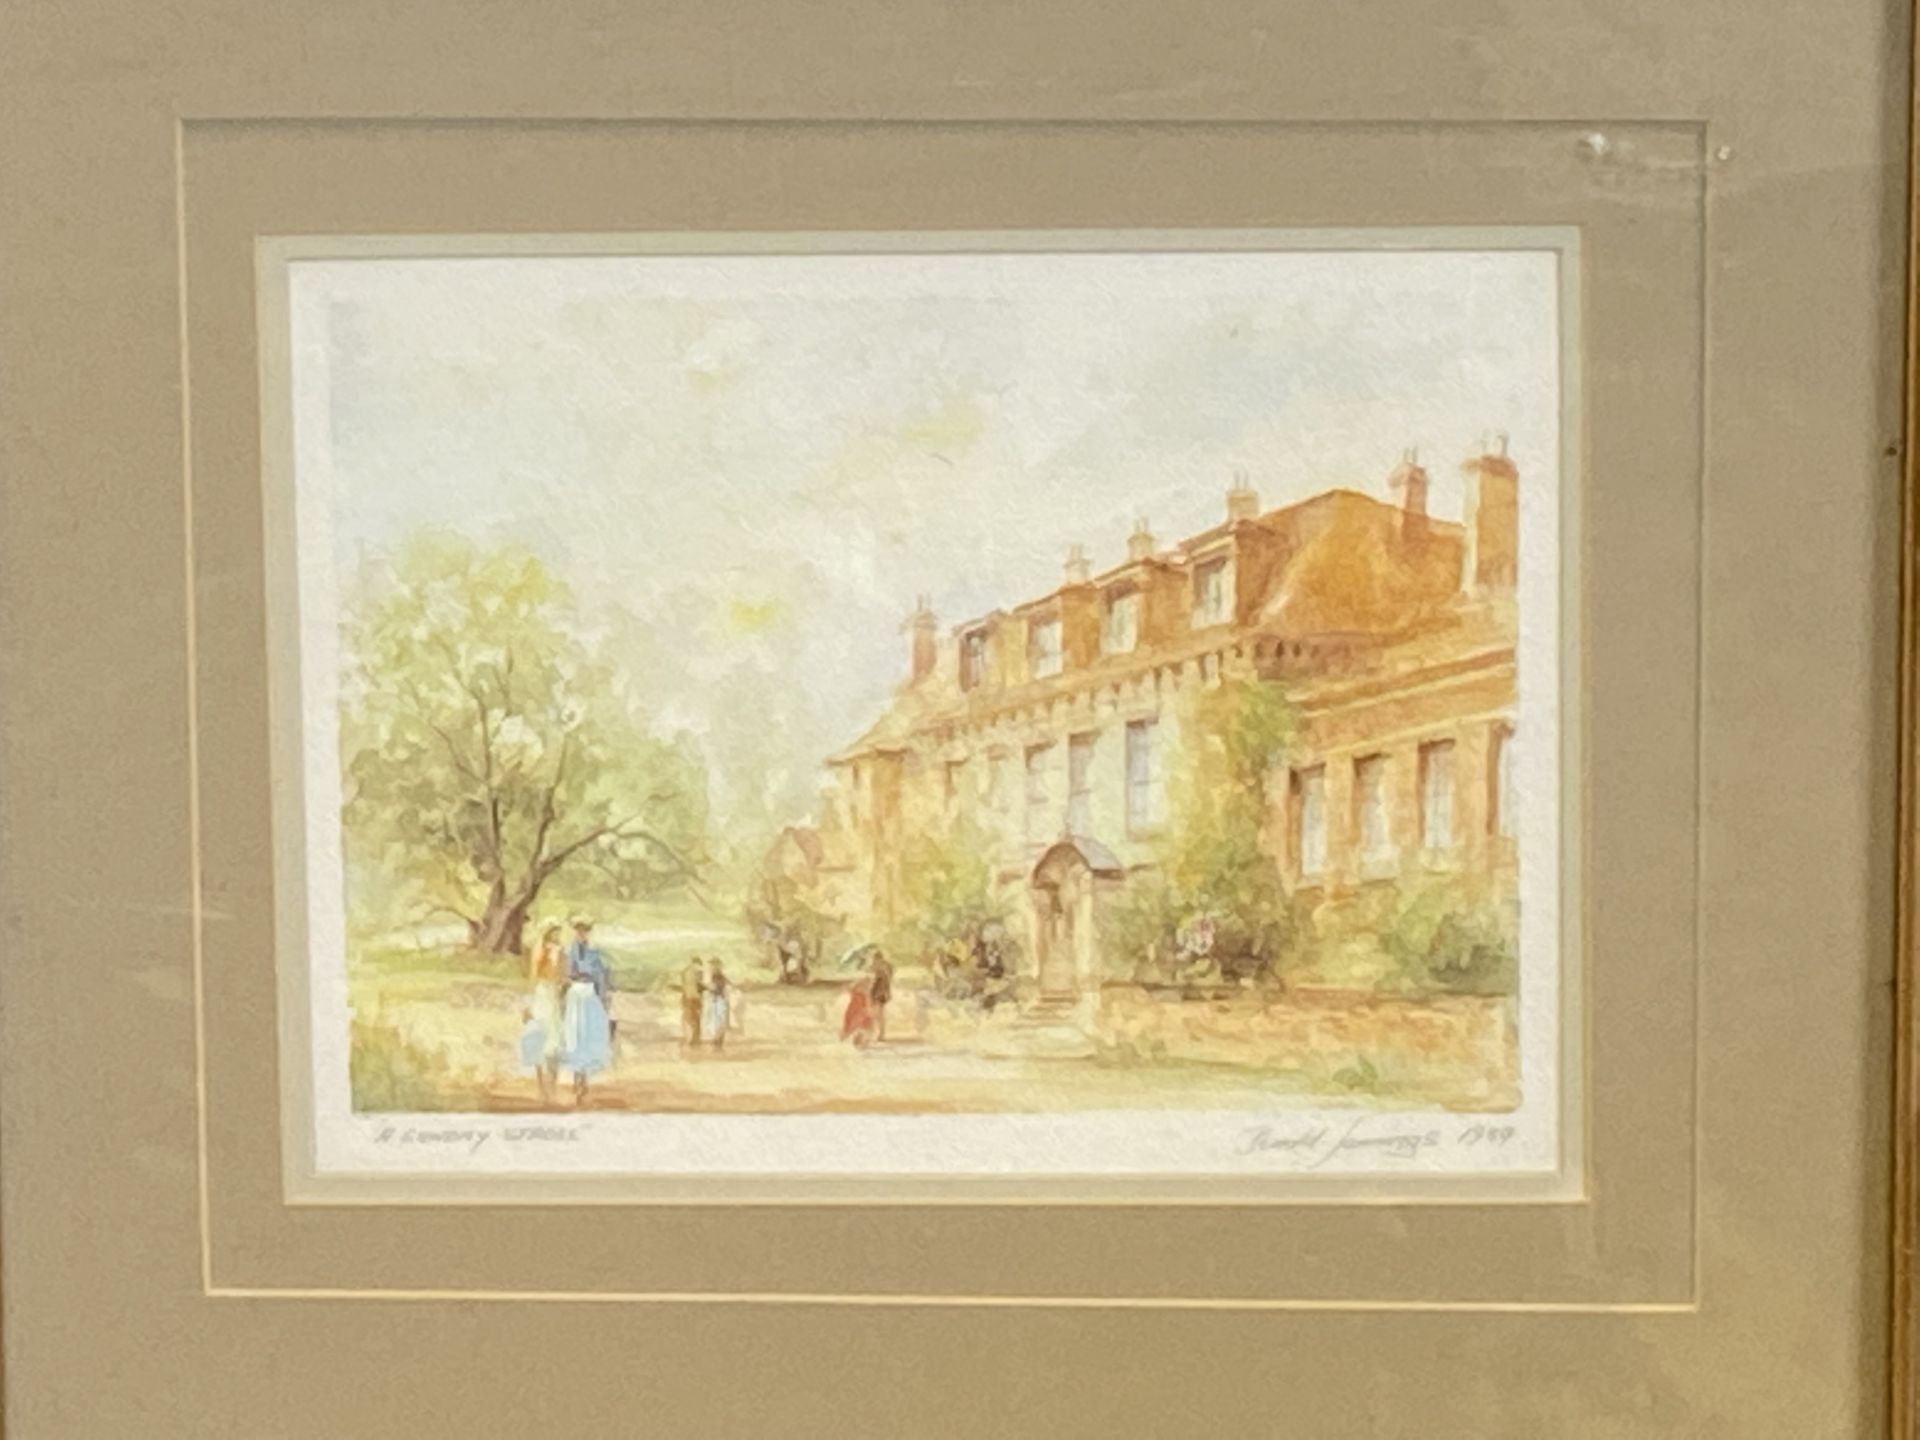 Framed and glazed watercolour 'A Sunday Stroll' - Image 3 of 4